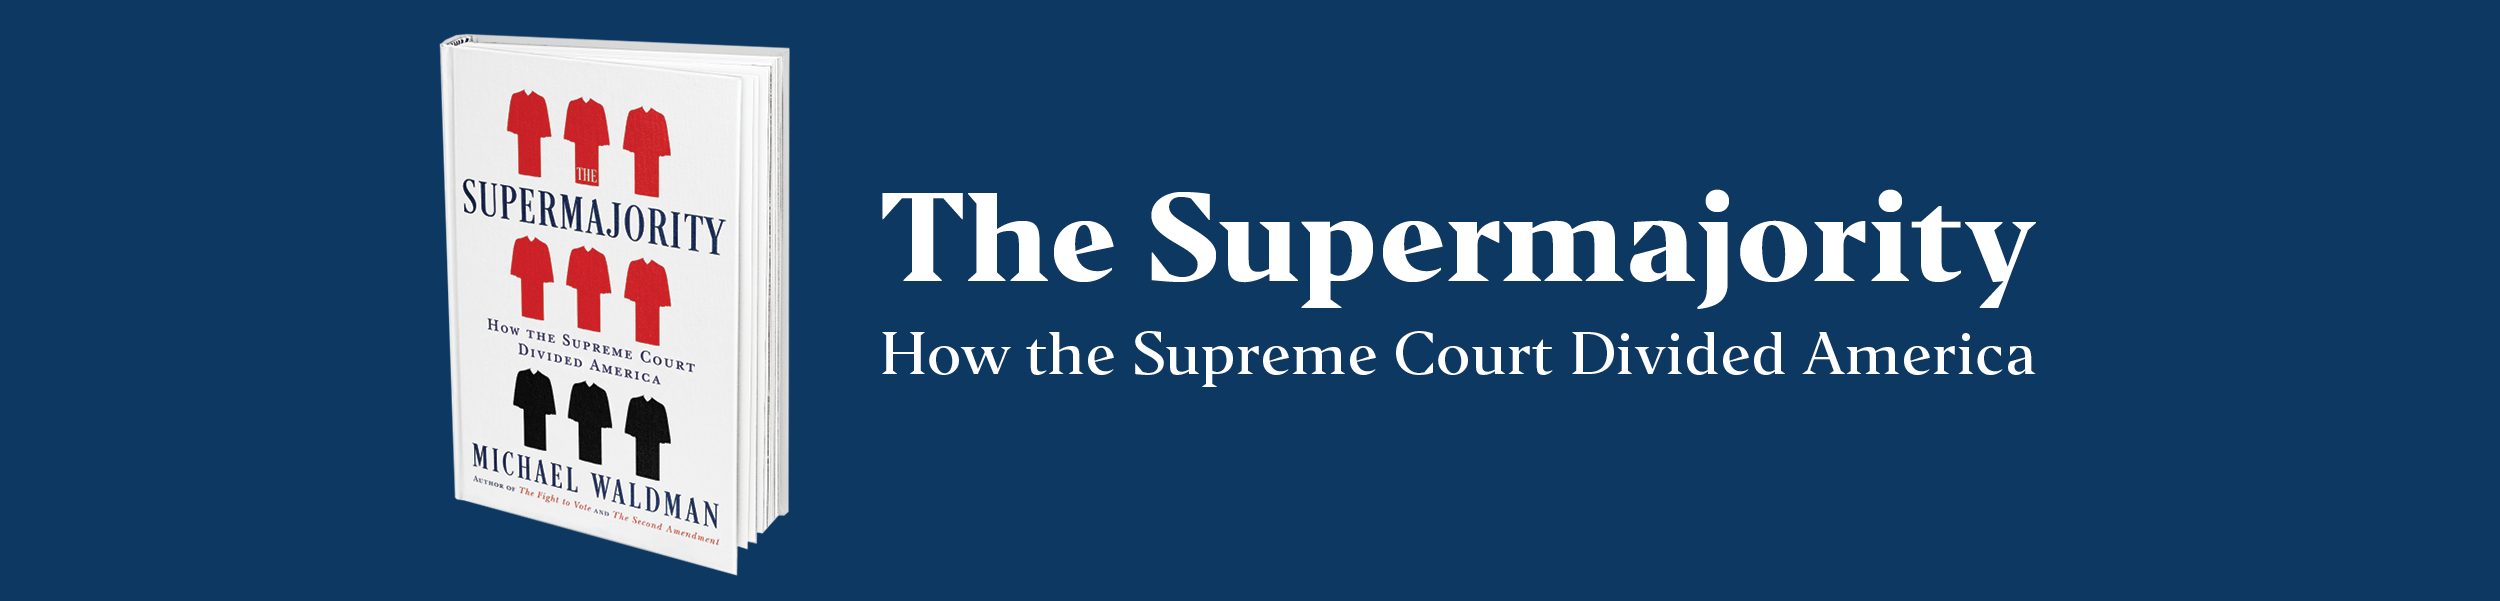 The Supermajority - How the Supreme Court Divided America